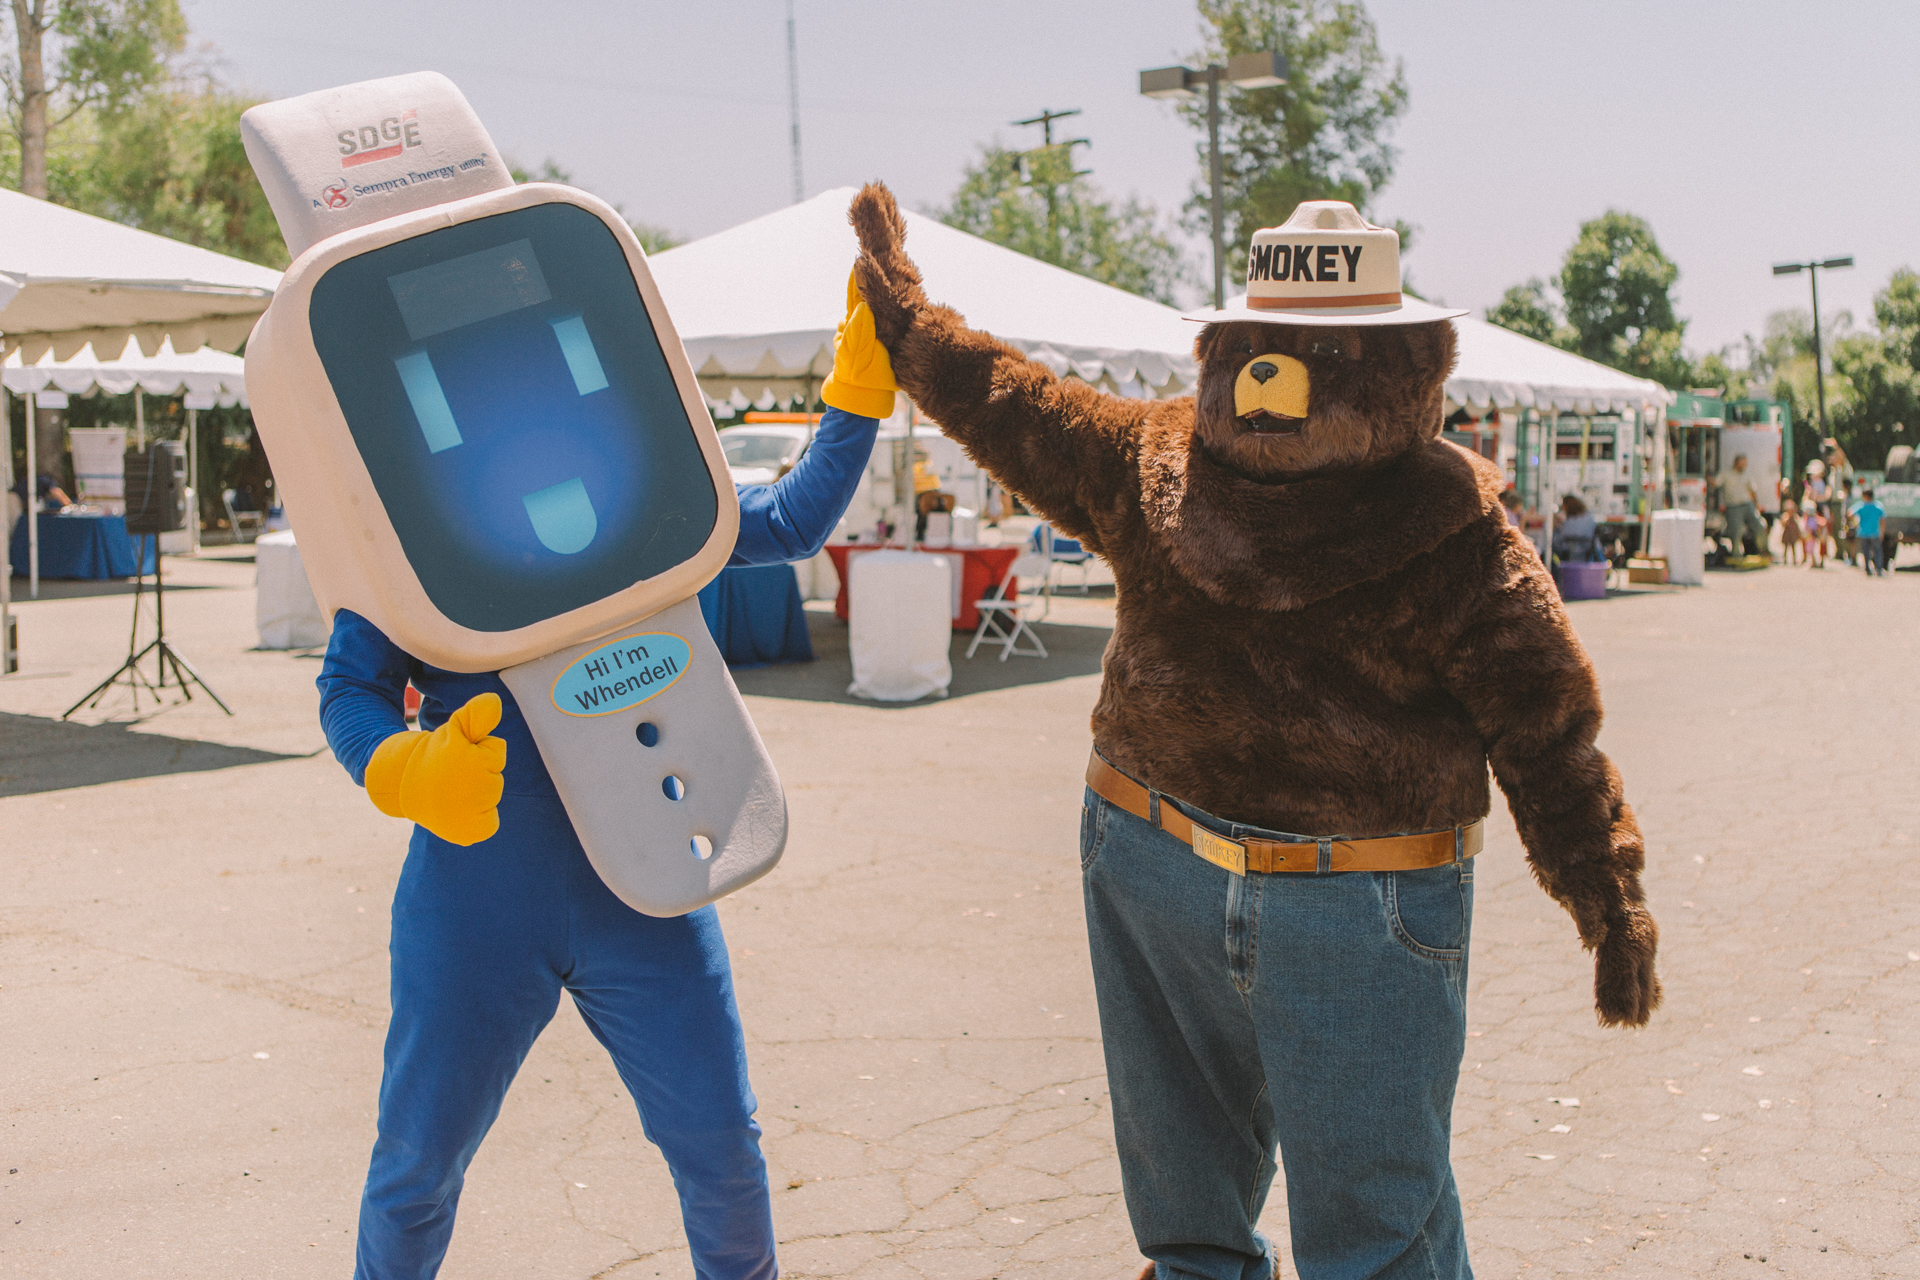 SDG&E Time of Use Mascot Whendell and Smokey Bear